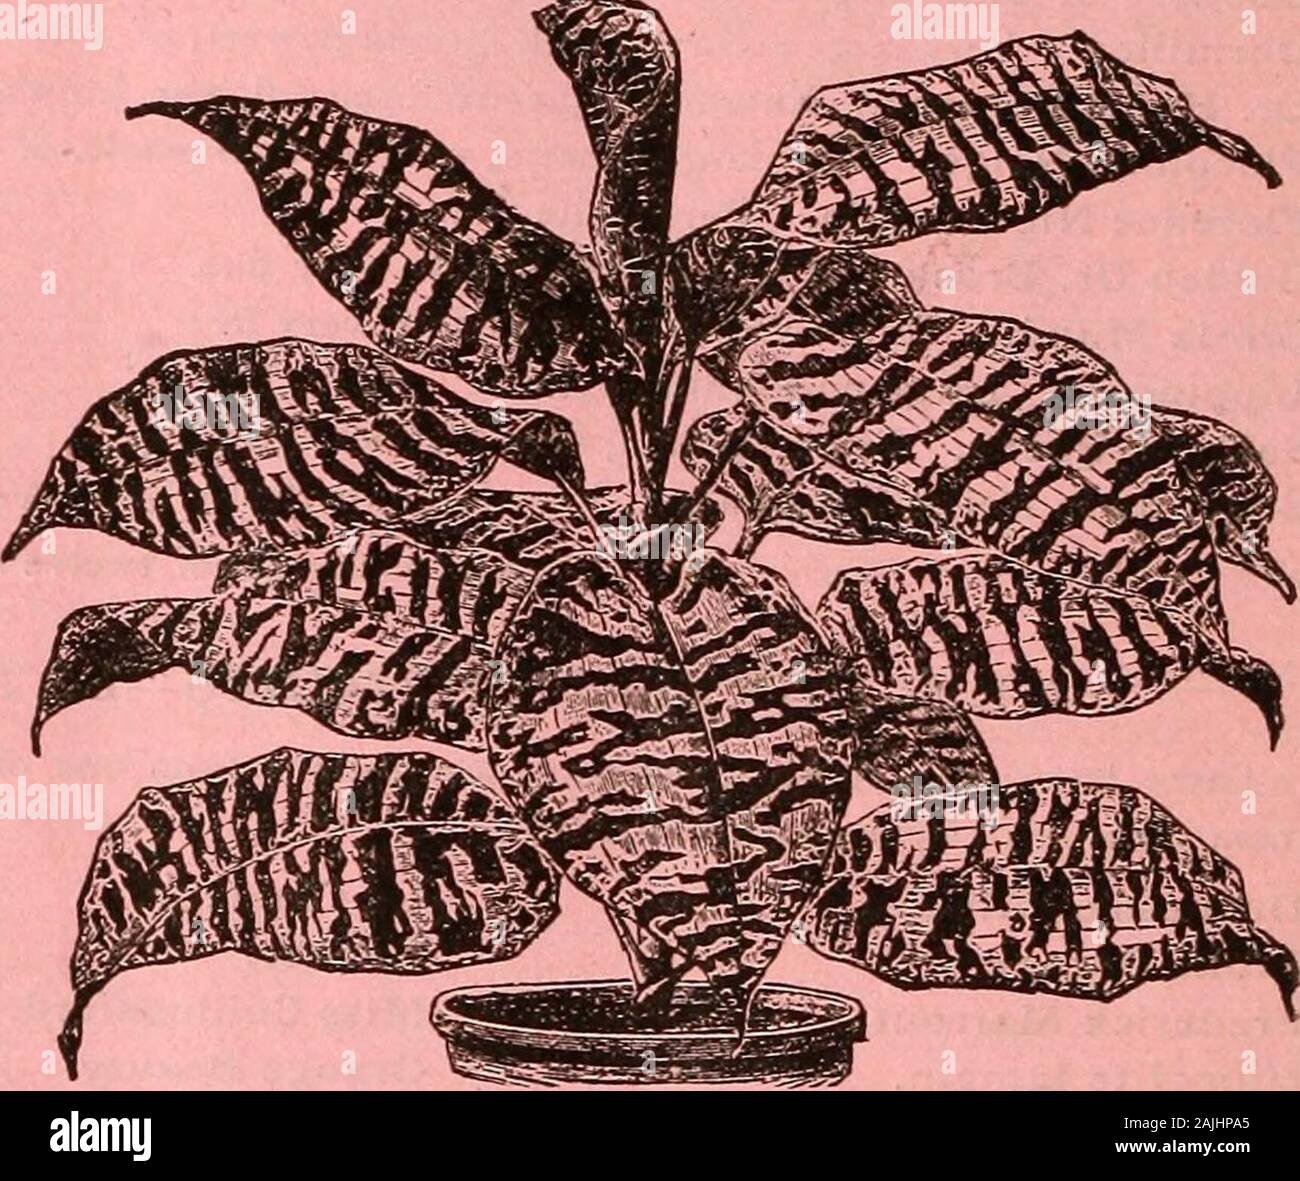 Dreer's garden calendar : 1884 . e base being dilated and sheathingthe stem. The blade of the leaf is marbled and irregularly banded ?with dark green and silver gray in altemate straight bands, the colors being about equally distributed. The back of the unfolded leaves and the stem where visible, are a pale reddish purple or wine color. It is, without doubt, one of the most superb of ornamental store plants, and indispensable in all first-class collections. $3.00 to jgio.oo. NEW DOUBLE FUCHSIAS. Joseph Rosaine. Very large scarlet tubesand sepals, corolla violet-blue, striped deepscarlet; very Stock Photo